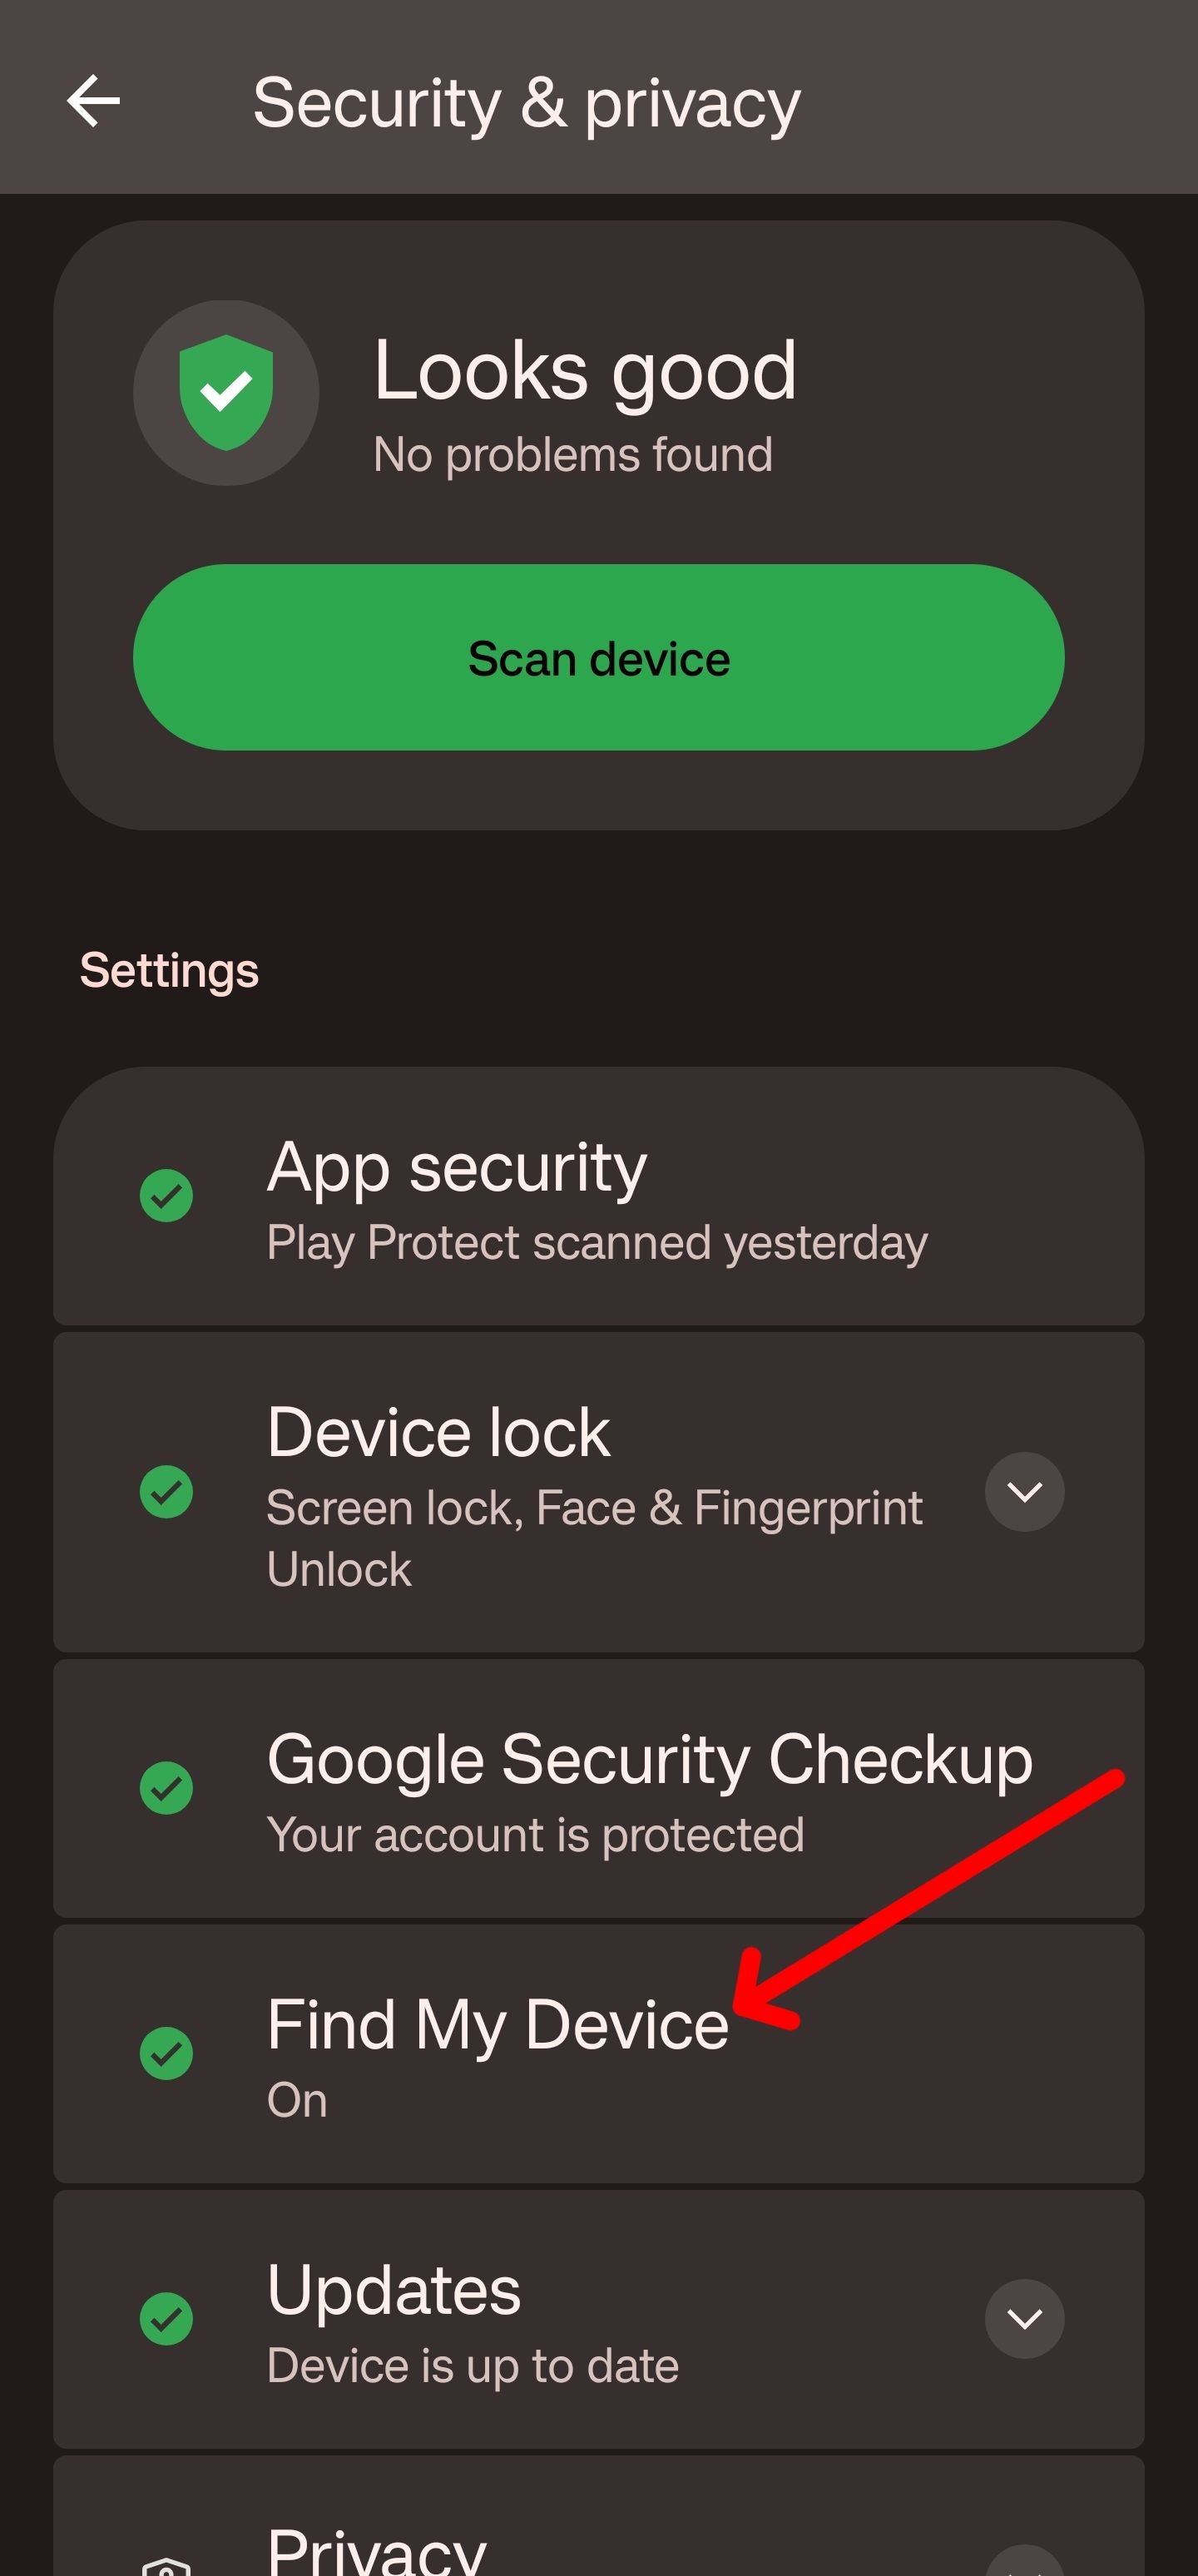 Select find my device from this menu